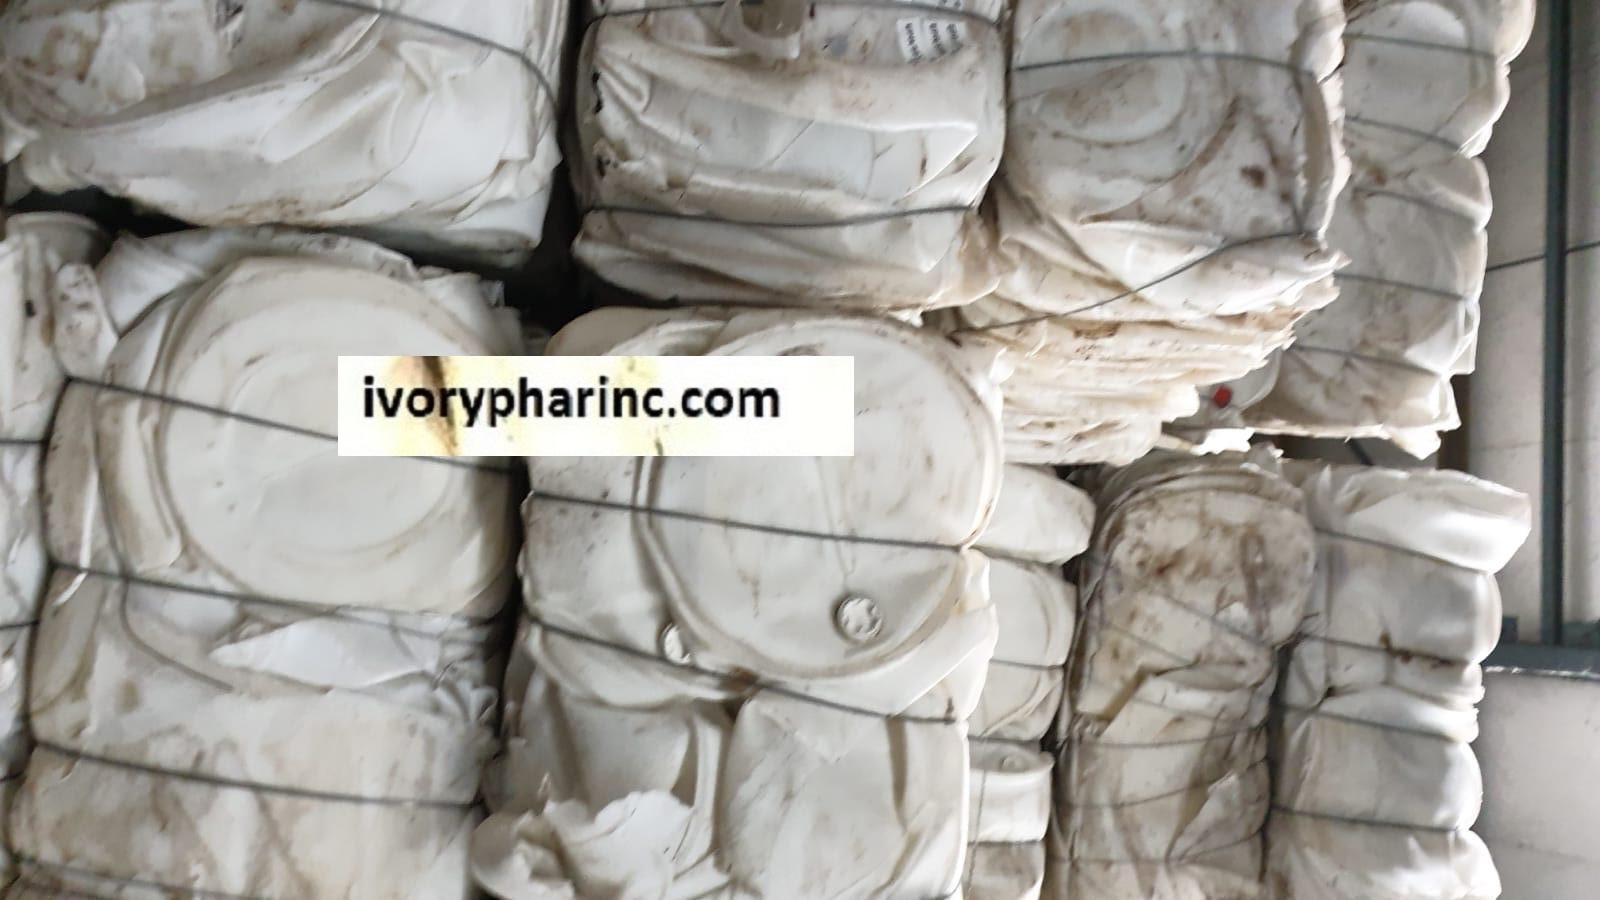 HDPE Drum Scrap Available For Sale Blue Regrind HDPE Drum for Blow Molding